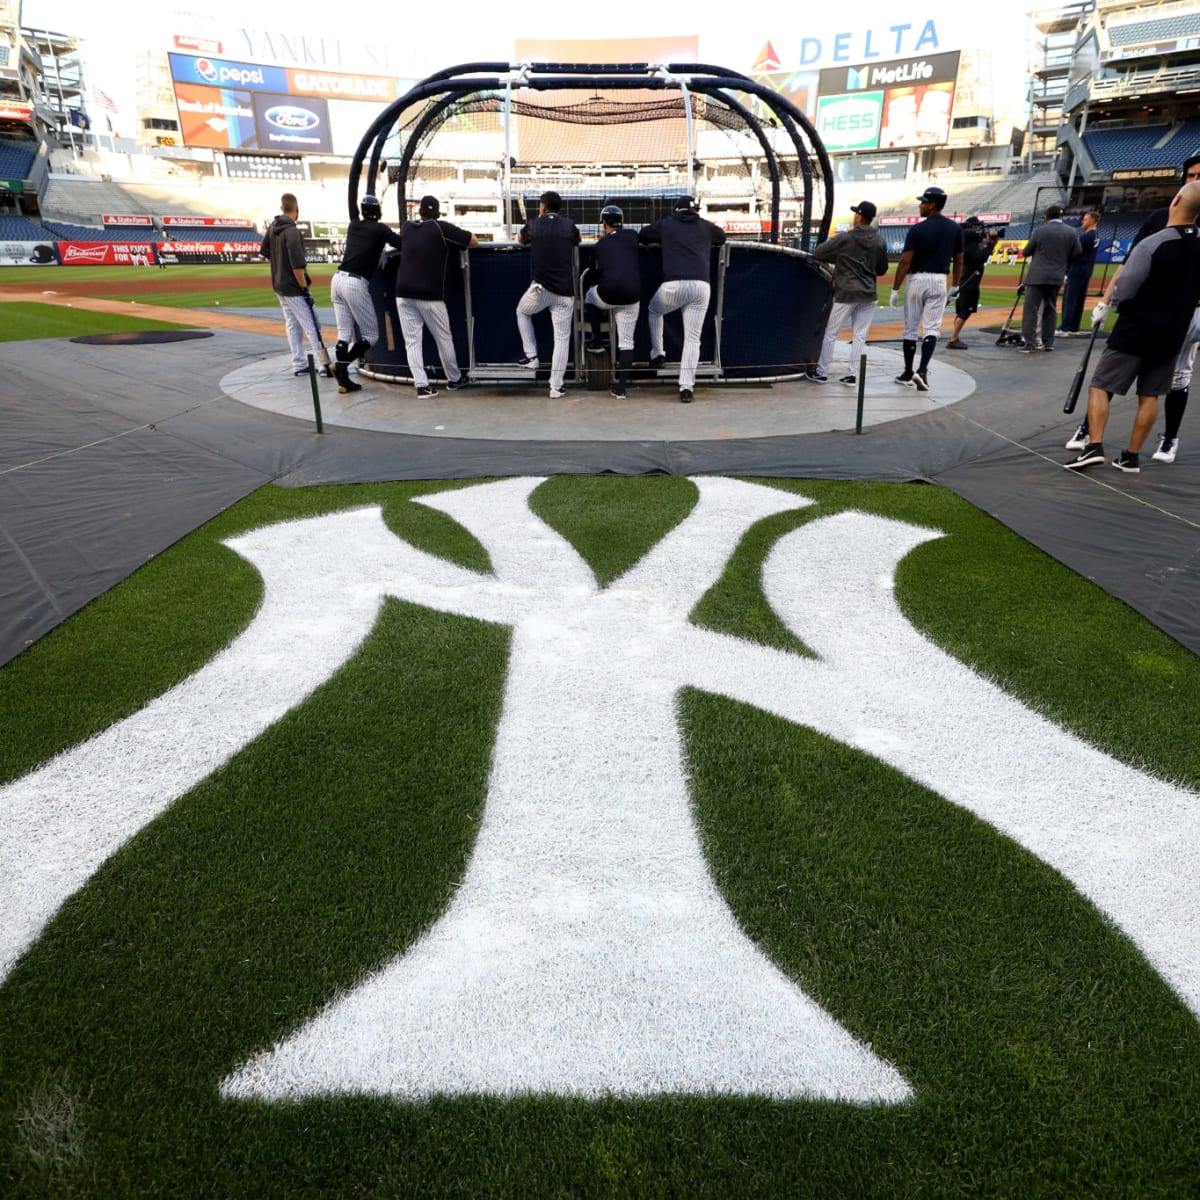 Another blow for Yankees bullpen going into postseason